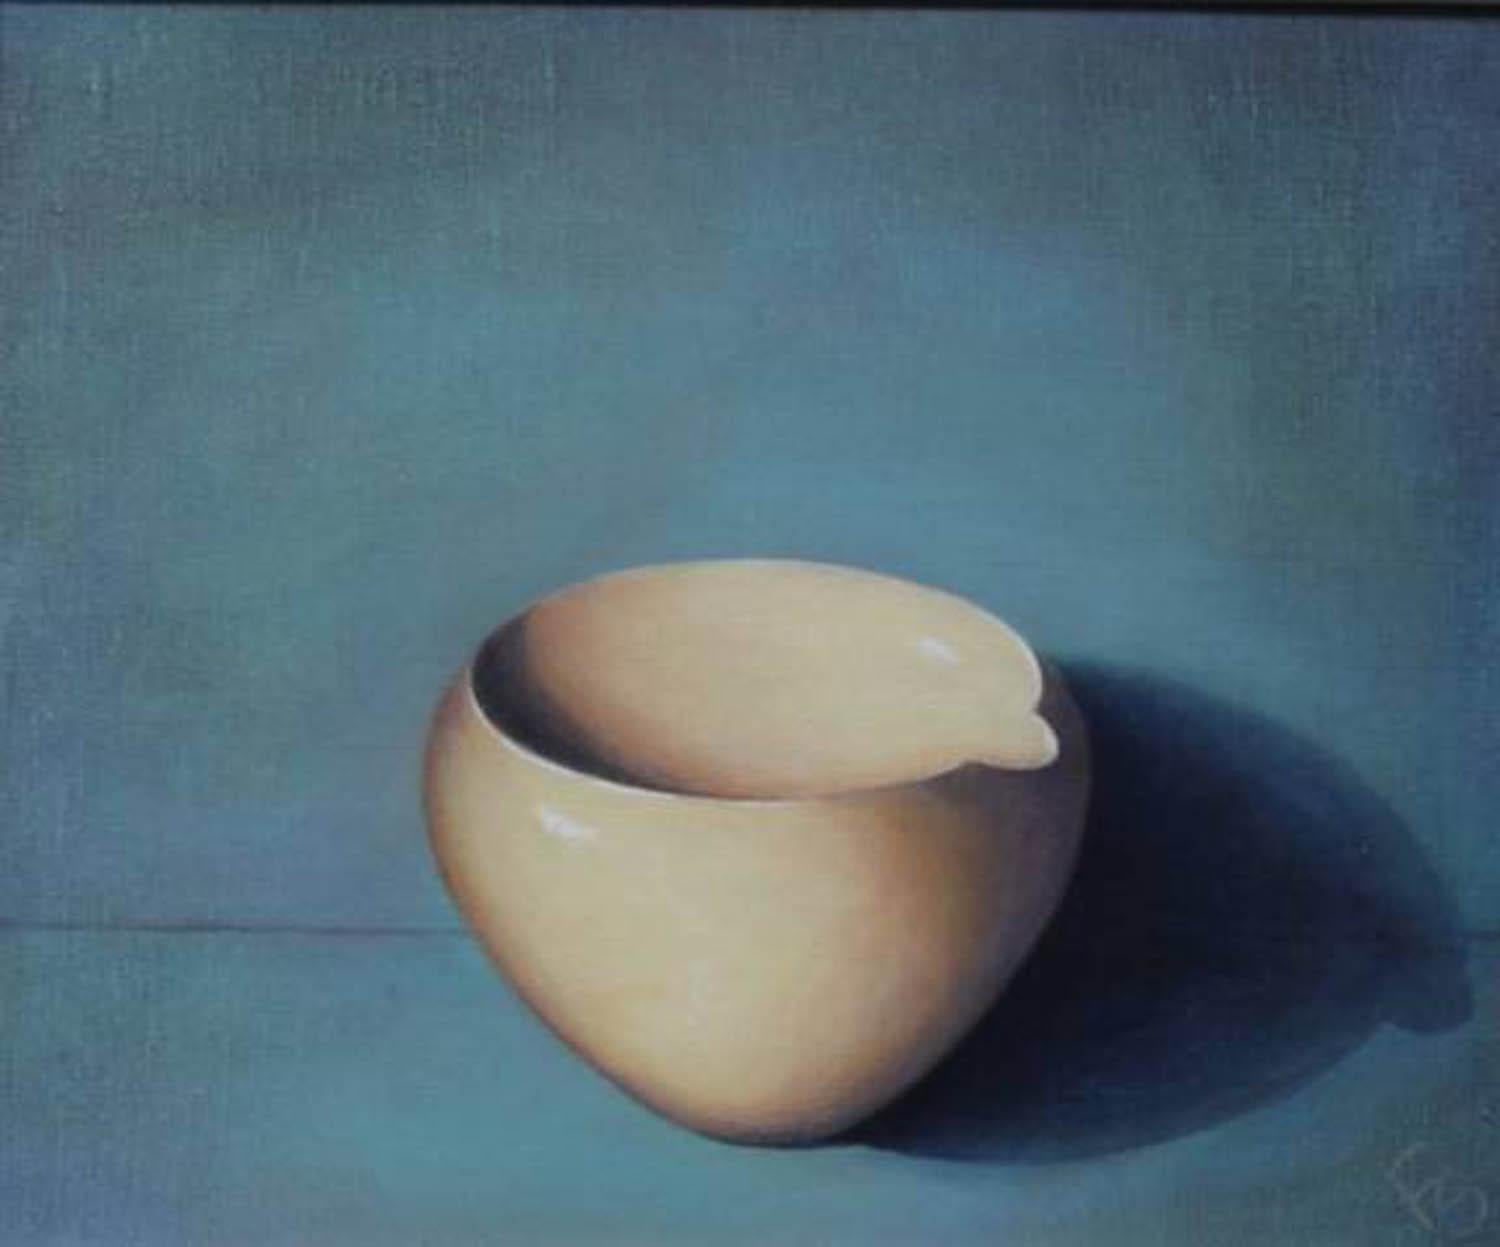 Fiona Smith Interior Painting - Pouring Bowl 1, Original Art, Still Life Painting Contemporary Realist Style Art